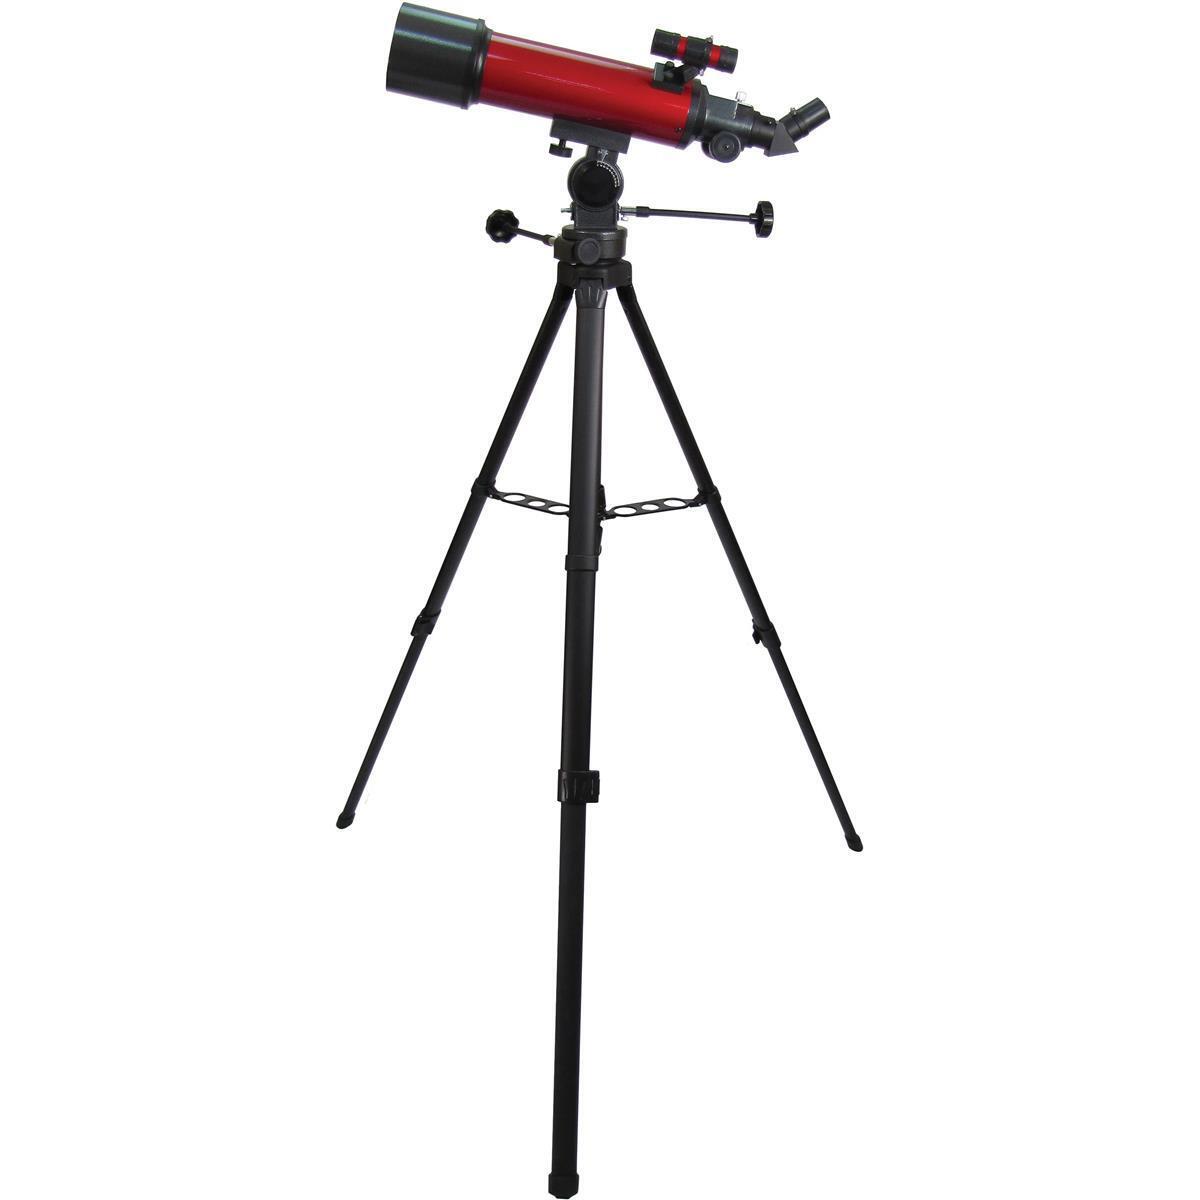 Carson Red Planet Series 25-56x80 Refractor Telescope #RP-200